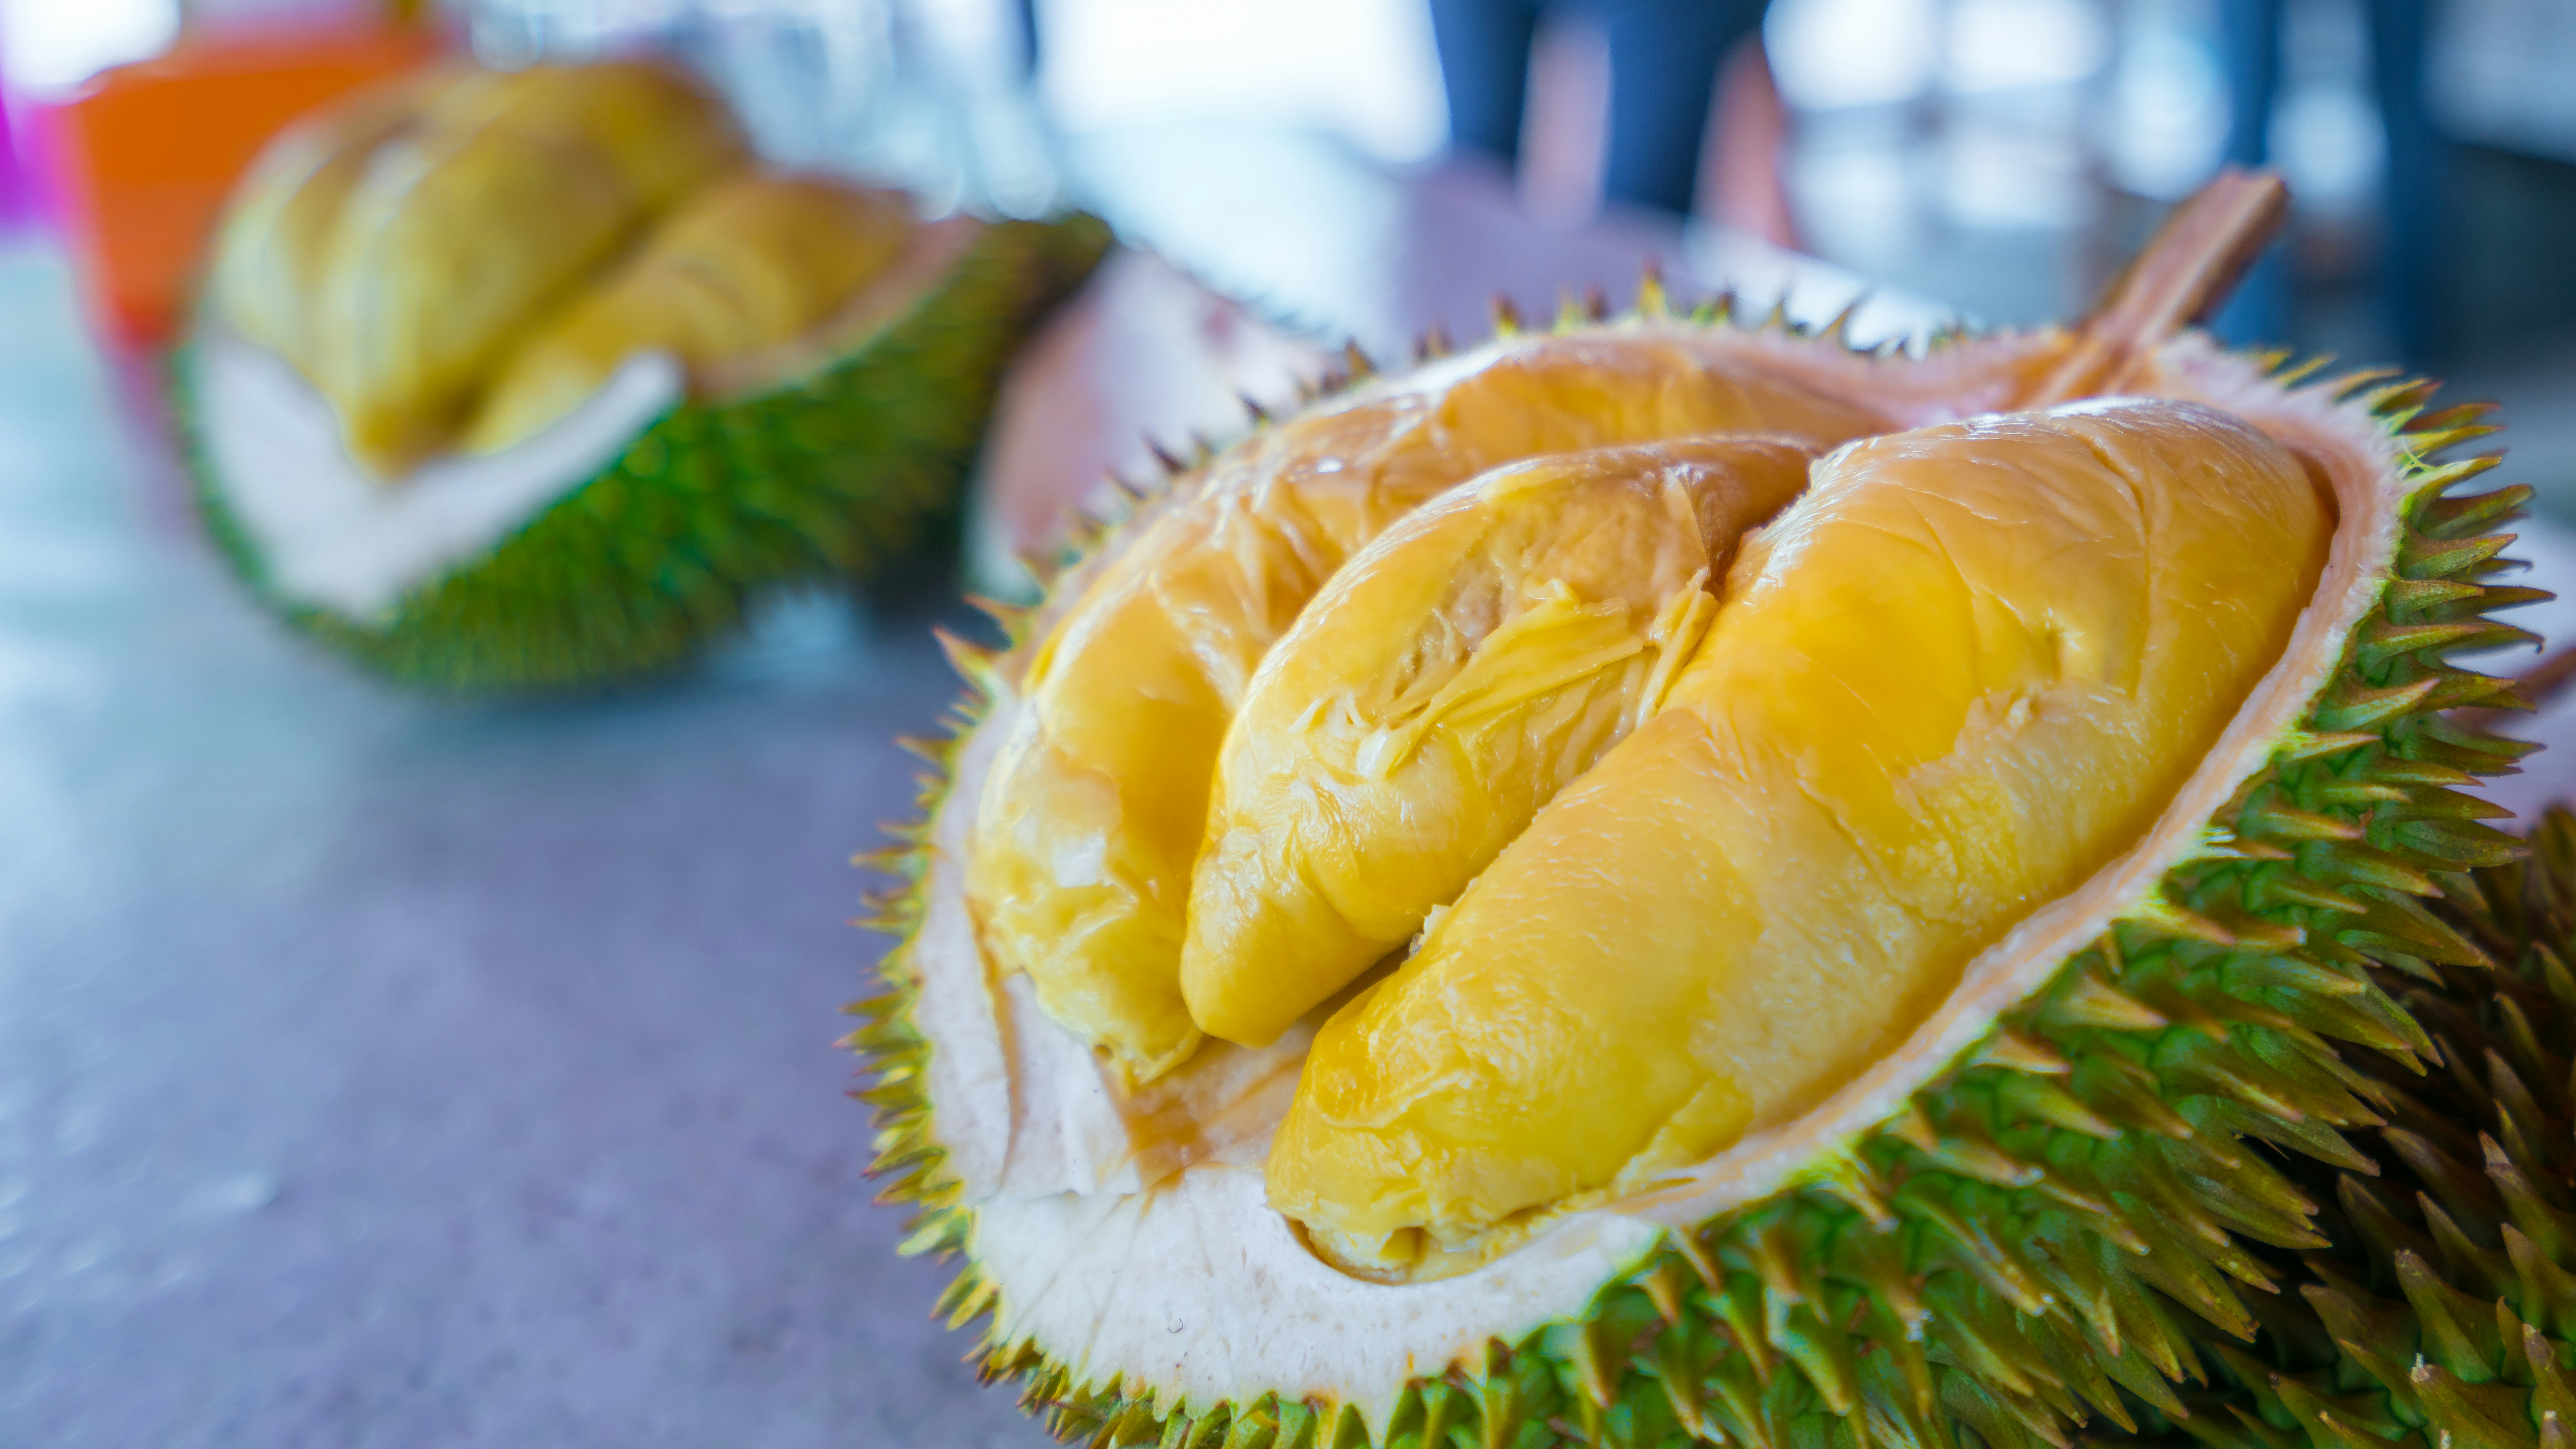 A pair of durian fruits have been cut open to show the fleshy portions